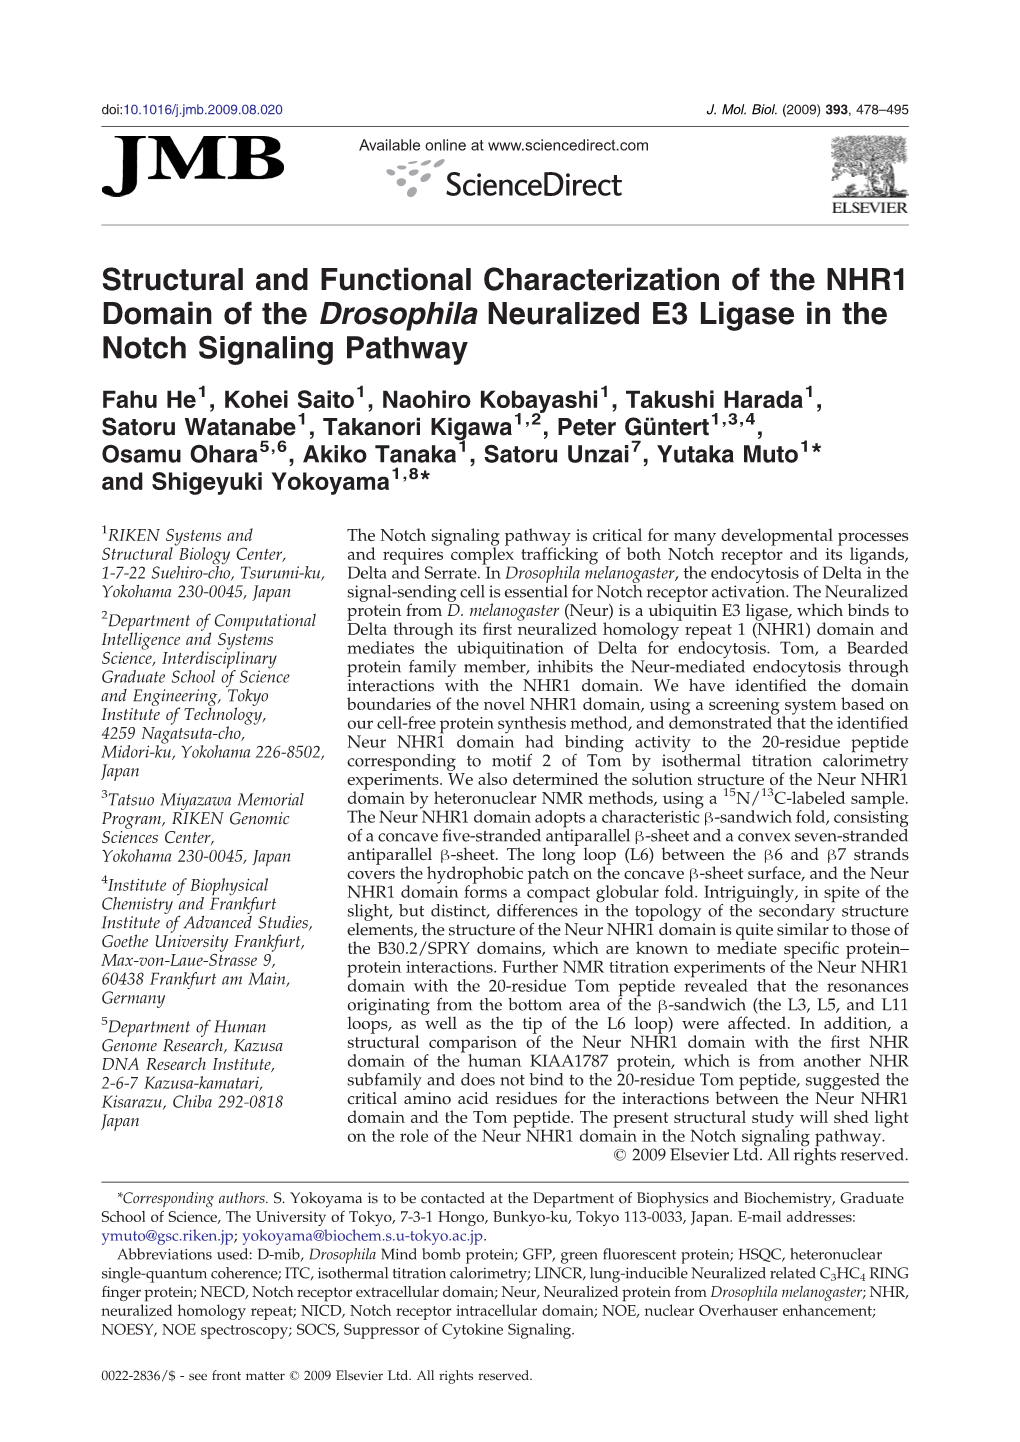 Structural and Functional Characterization of the NHR1 Domain of the Drosophila Neuralized E3 Ligase in the Notch Signaling Pathway